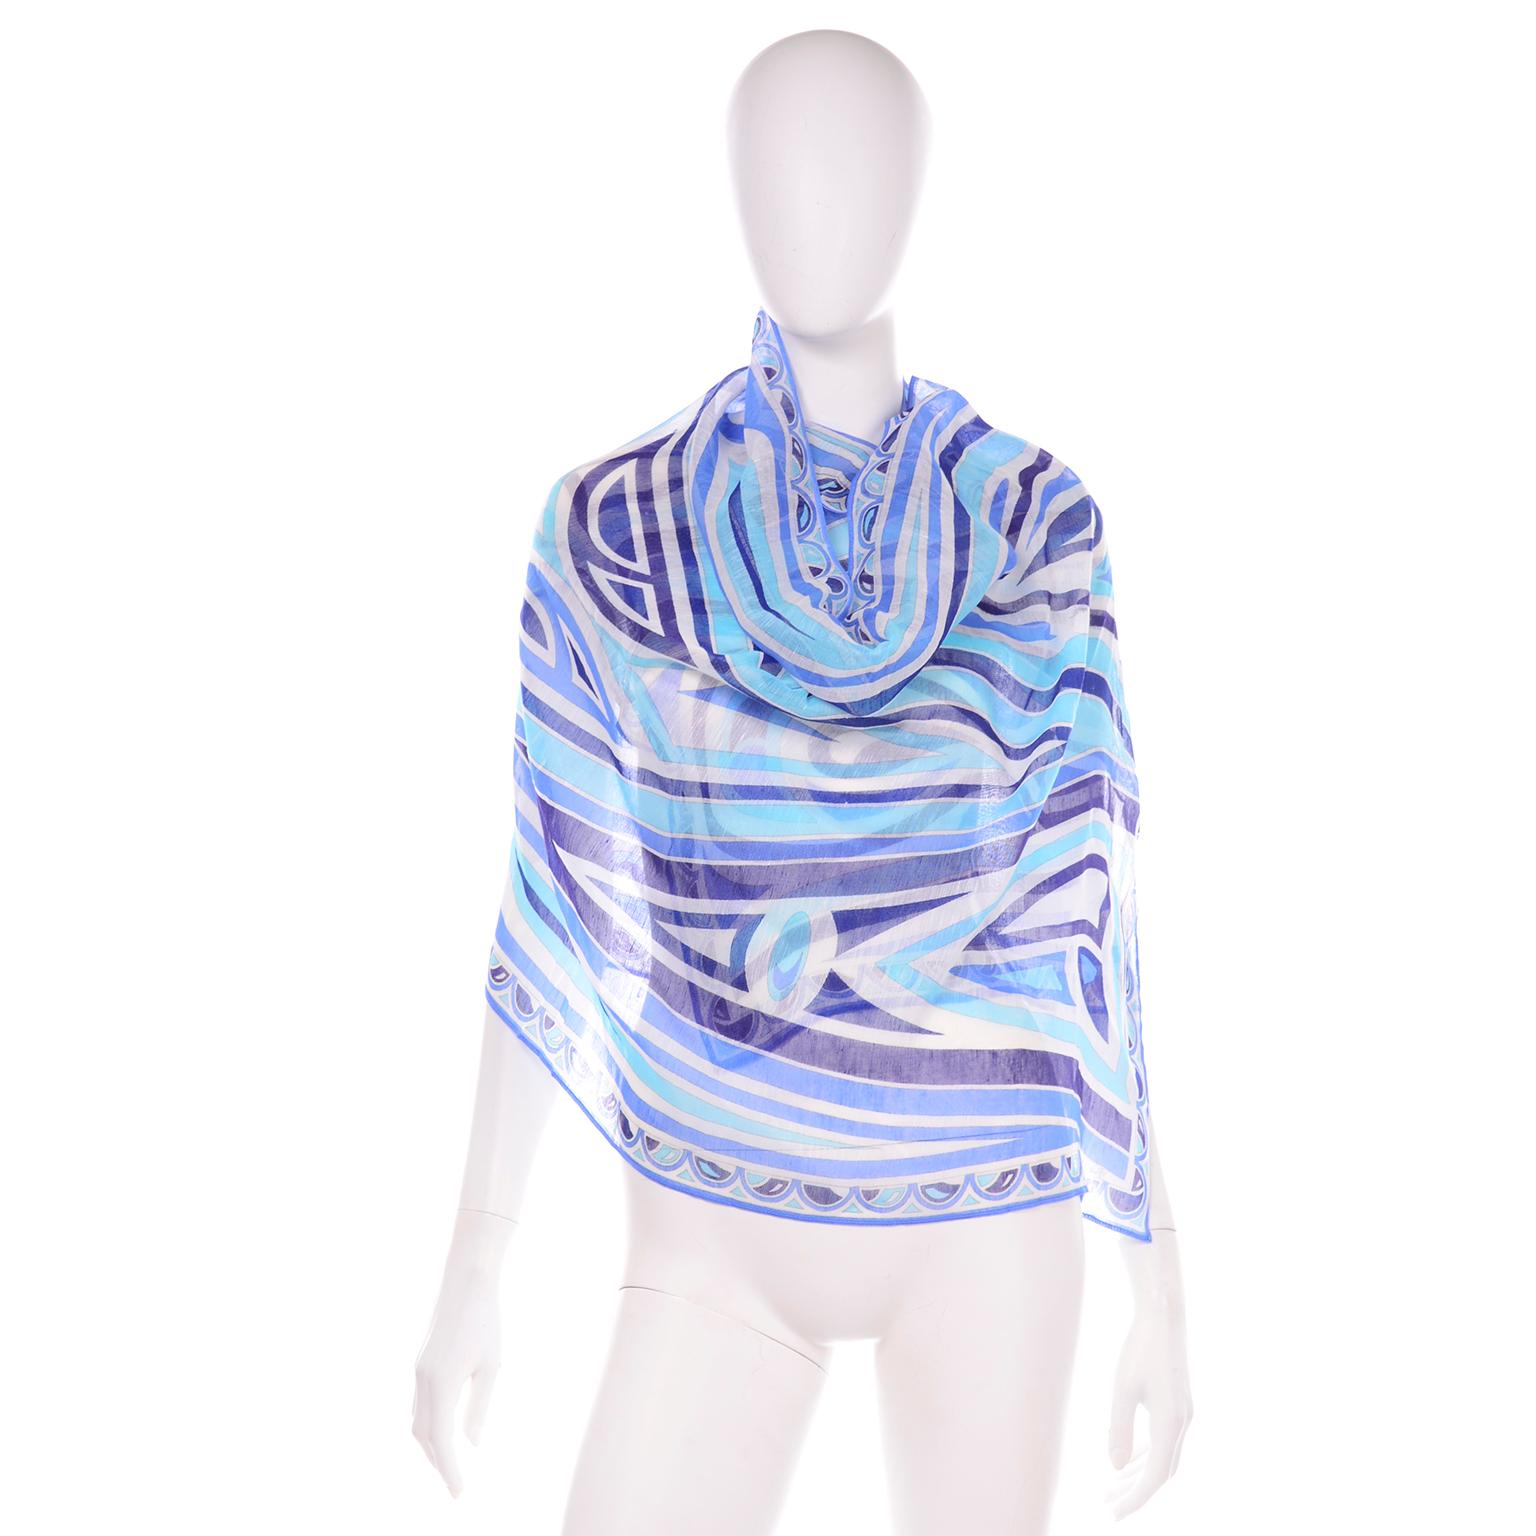 This Emilio Pucci scarf is brand new and comes with its original box! The abstract blue print fabric is 65% Linen and  35% Cotton. Made in Italy.

LENGTH: 72